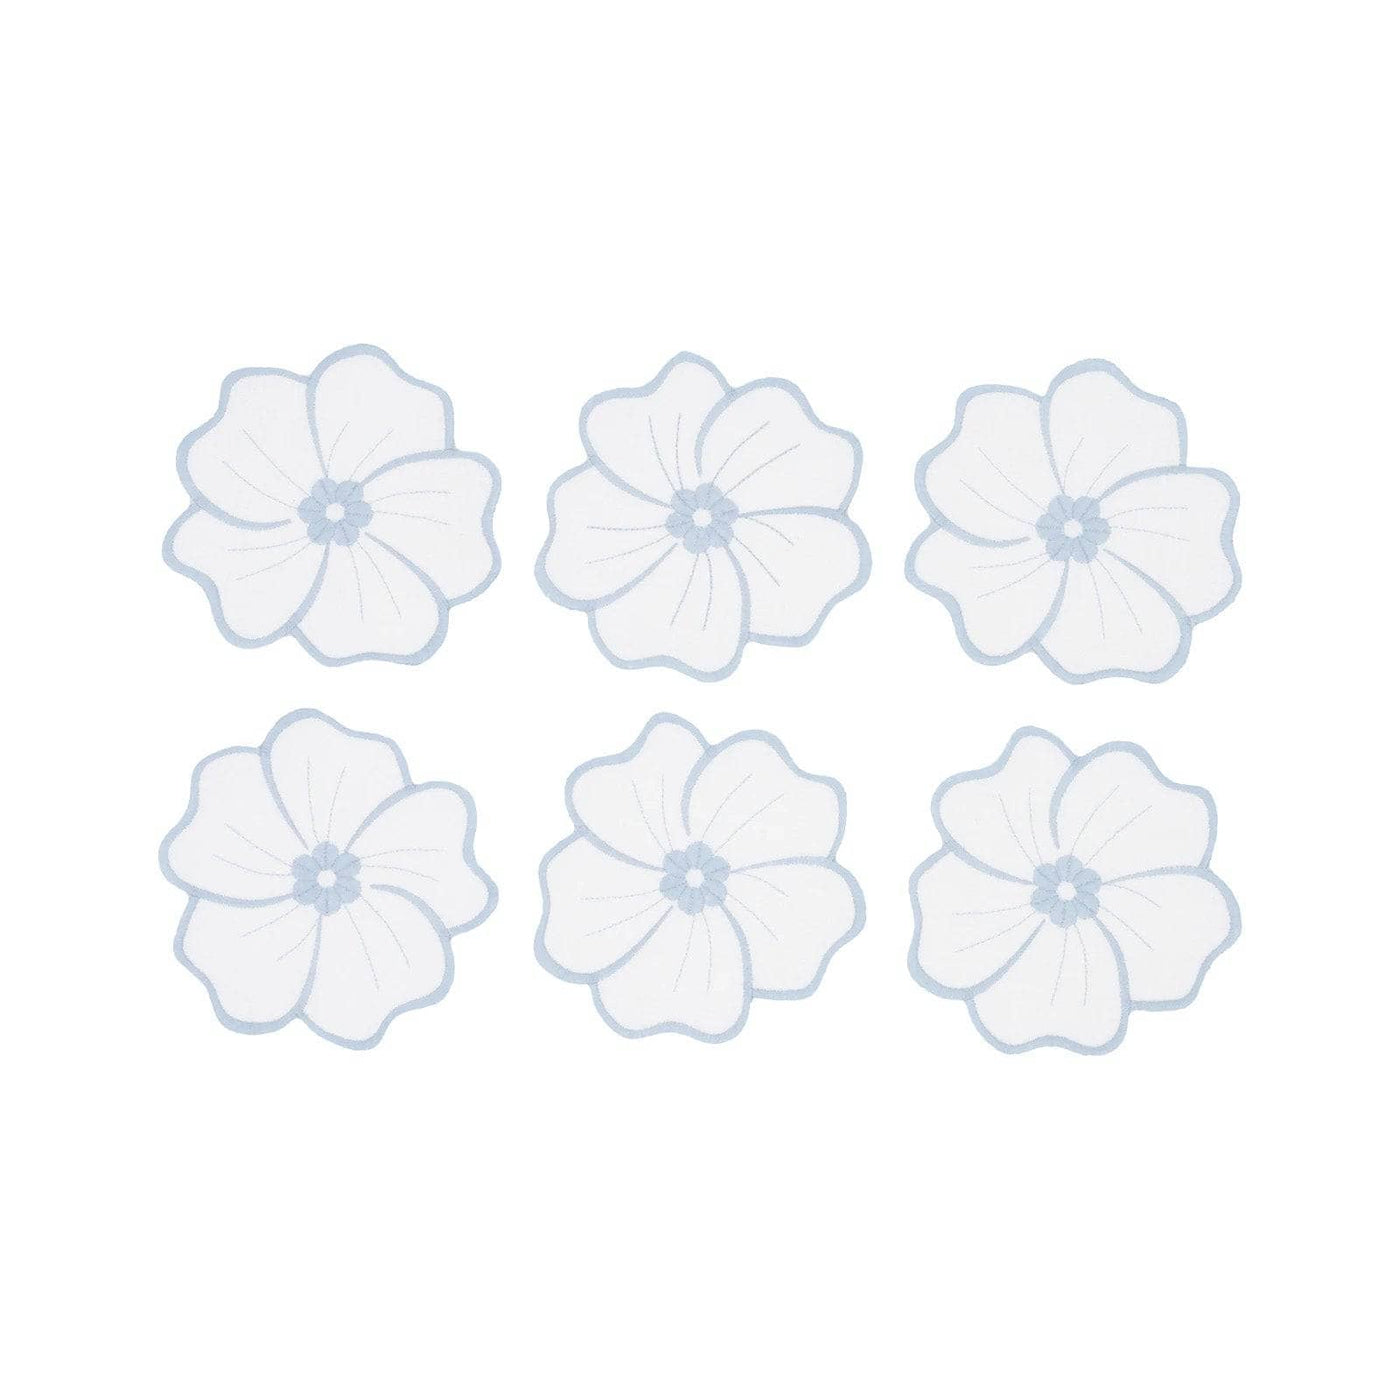 Hannah Set of 6 Embroidered Daisy Coasters, Blue 2